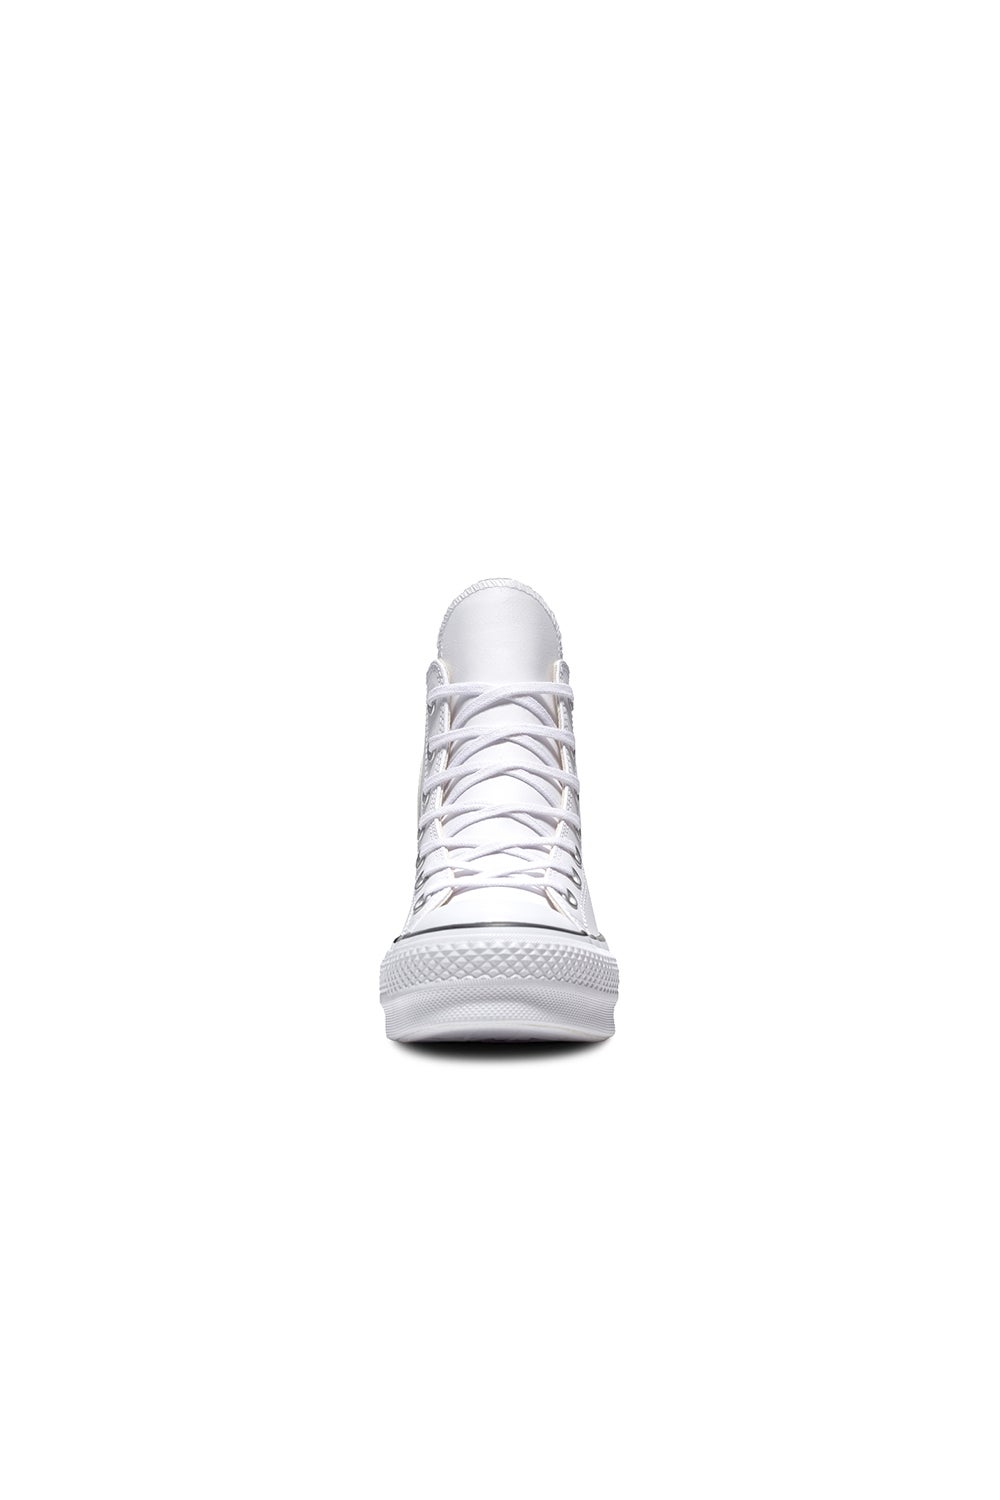 Converse Chuck Taylor All Star Seasonal Leather Lift High Top White